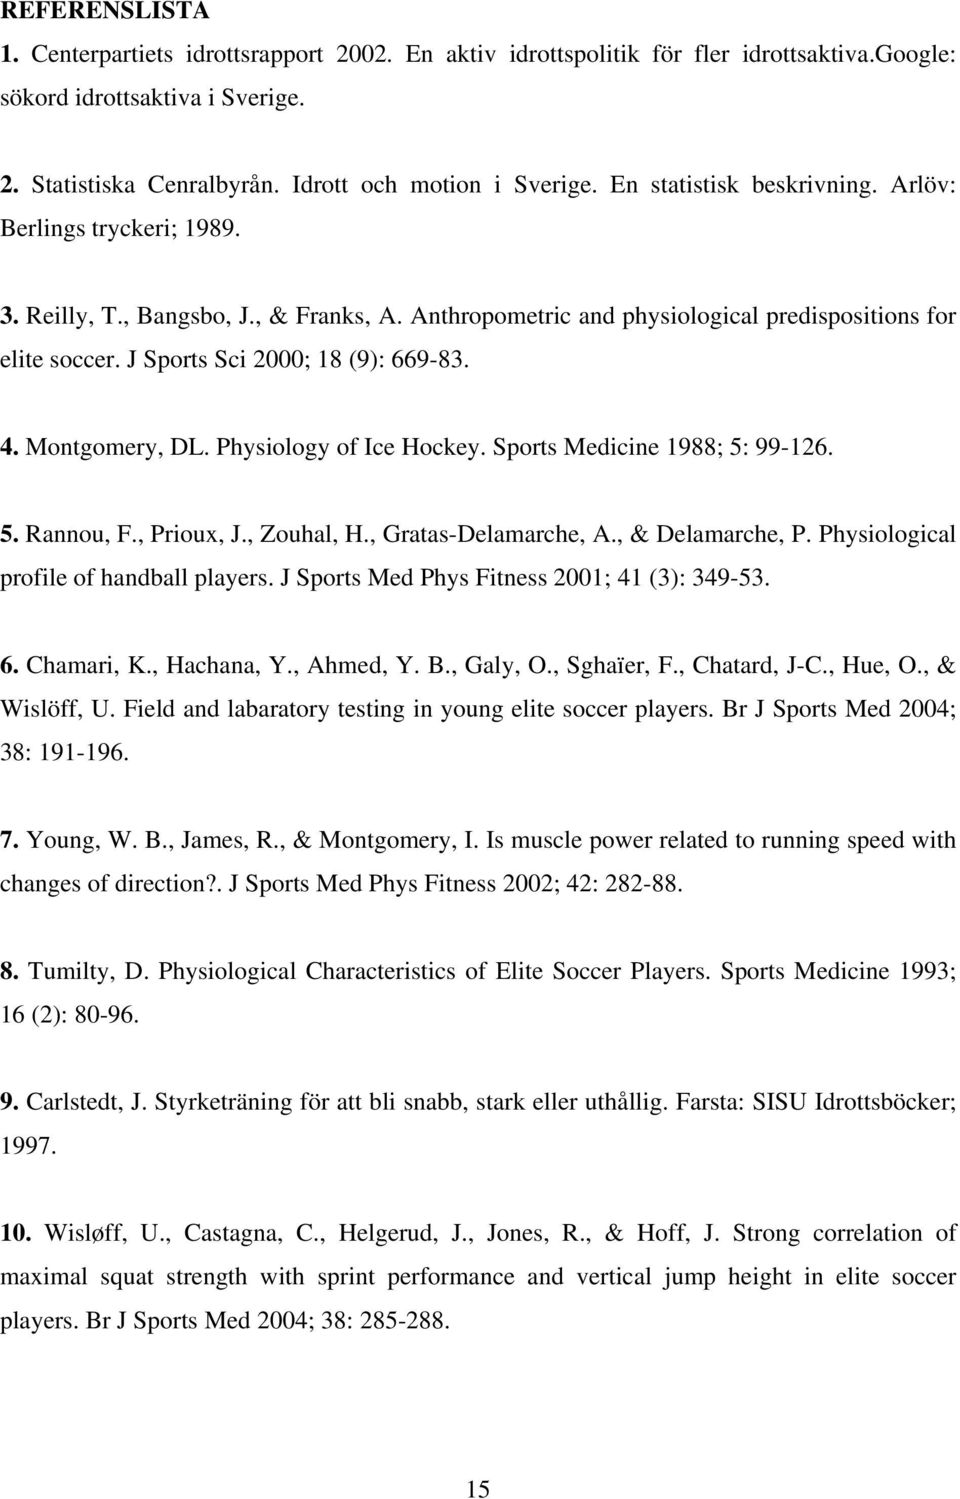 J Sports Sci 2000; 18 (9): 669-83. 4. Montgomery, DL. Physiology of Ice Hockey. Sports Medicine 1988; 5: 99-126. 5. Rannou, F., Prioux, J., Zouhal, H., Gratas-Delamarche, A., & Delamarche, P.